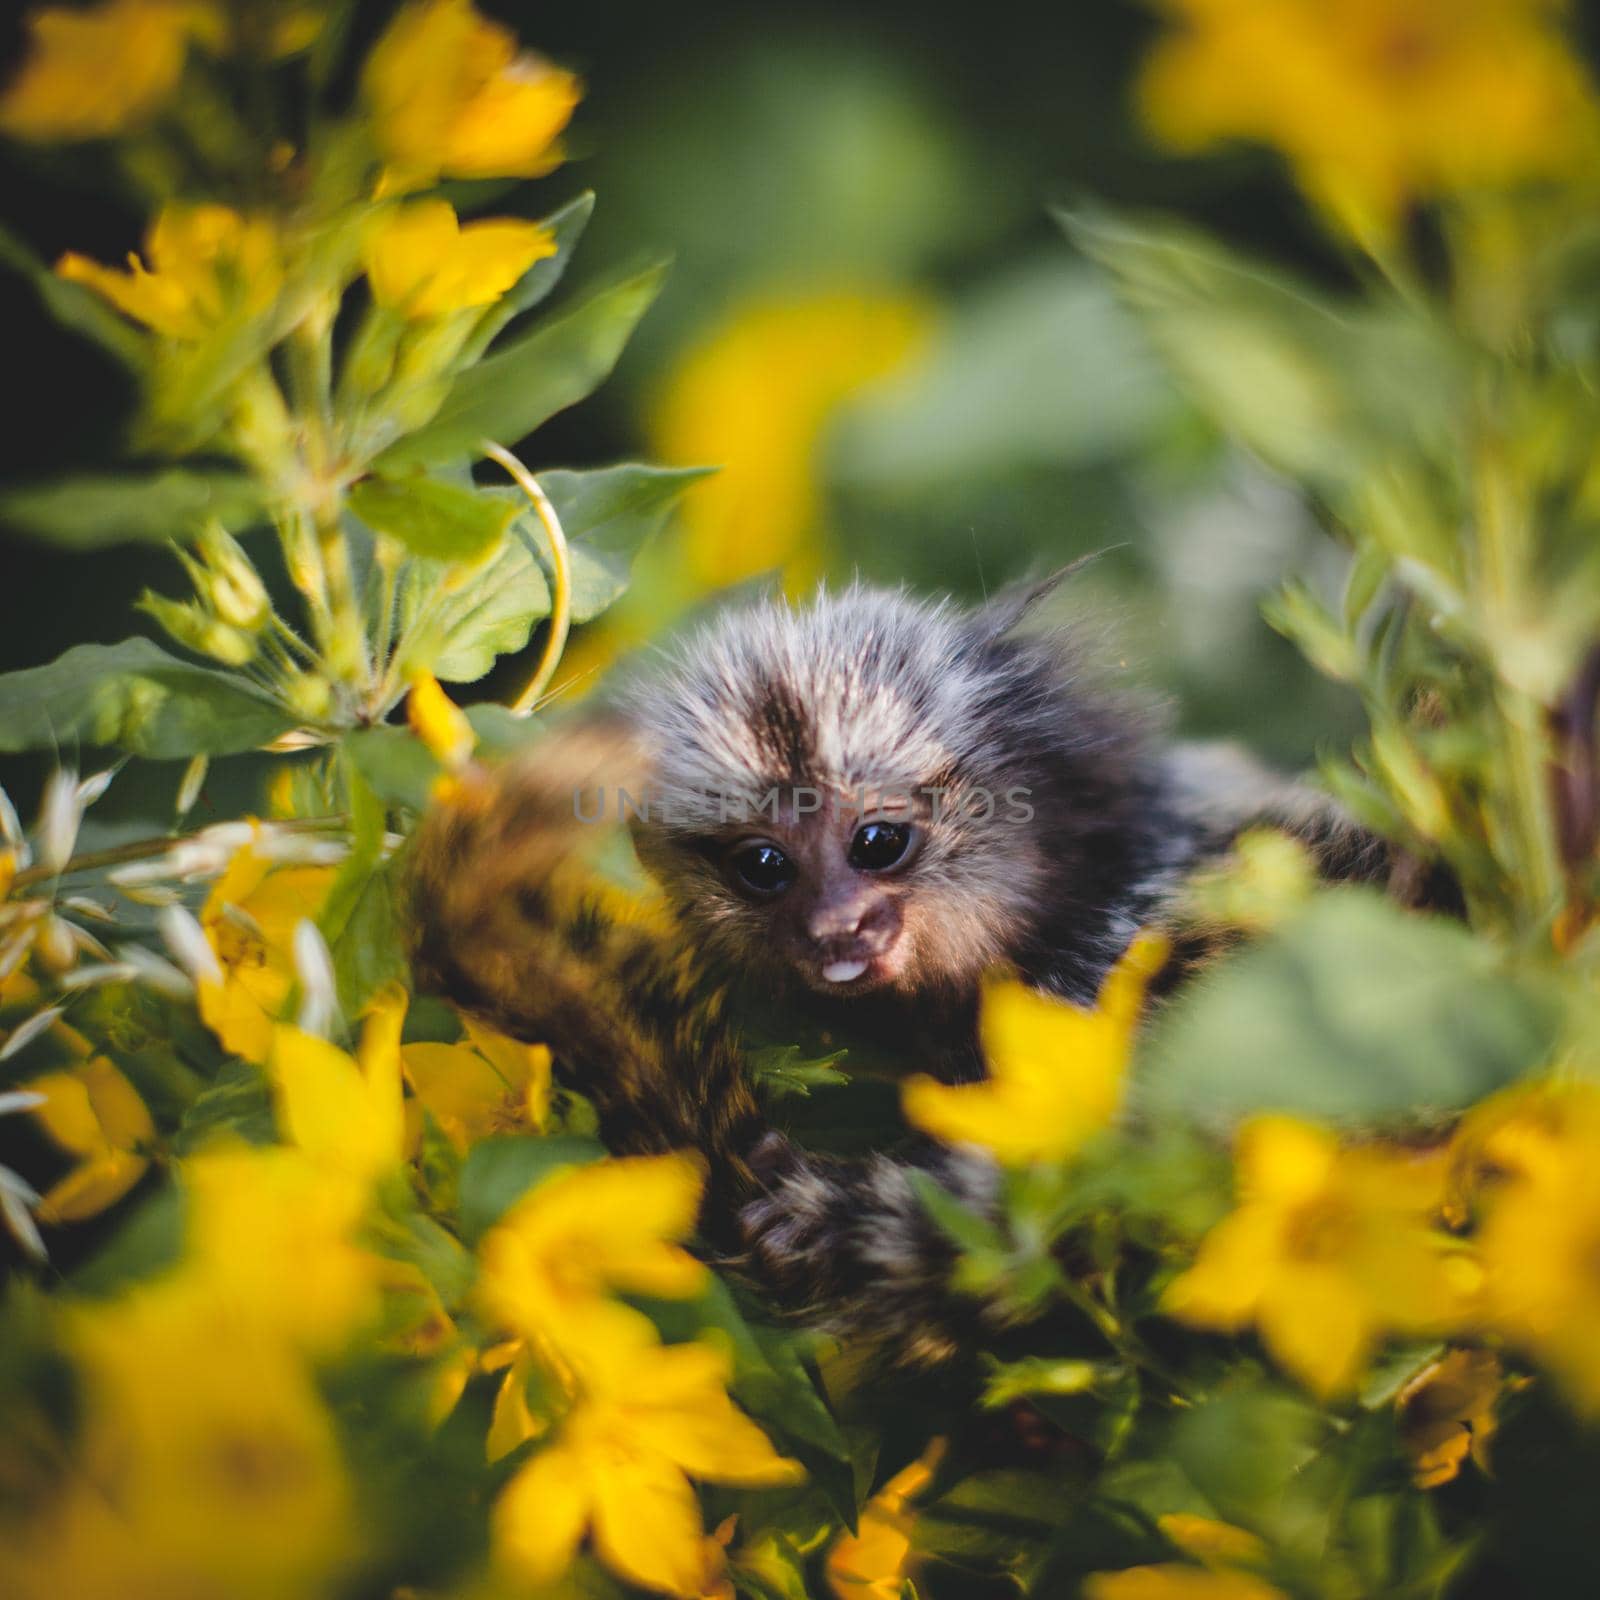 The common marmoset baby on the branch in summer garden by RosaJay